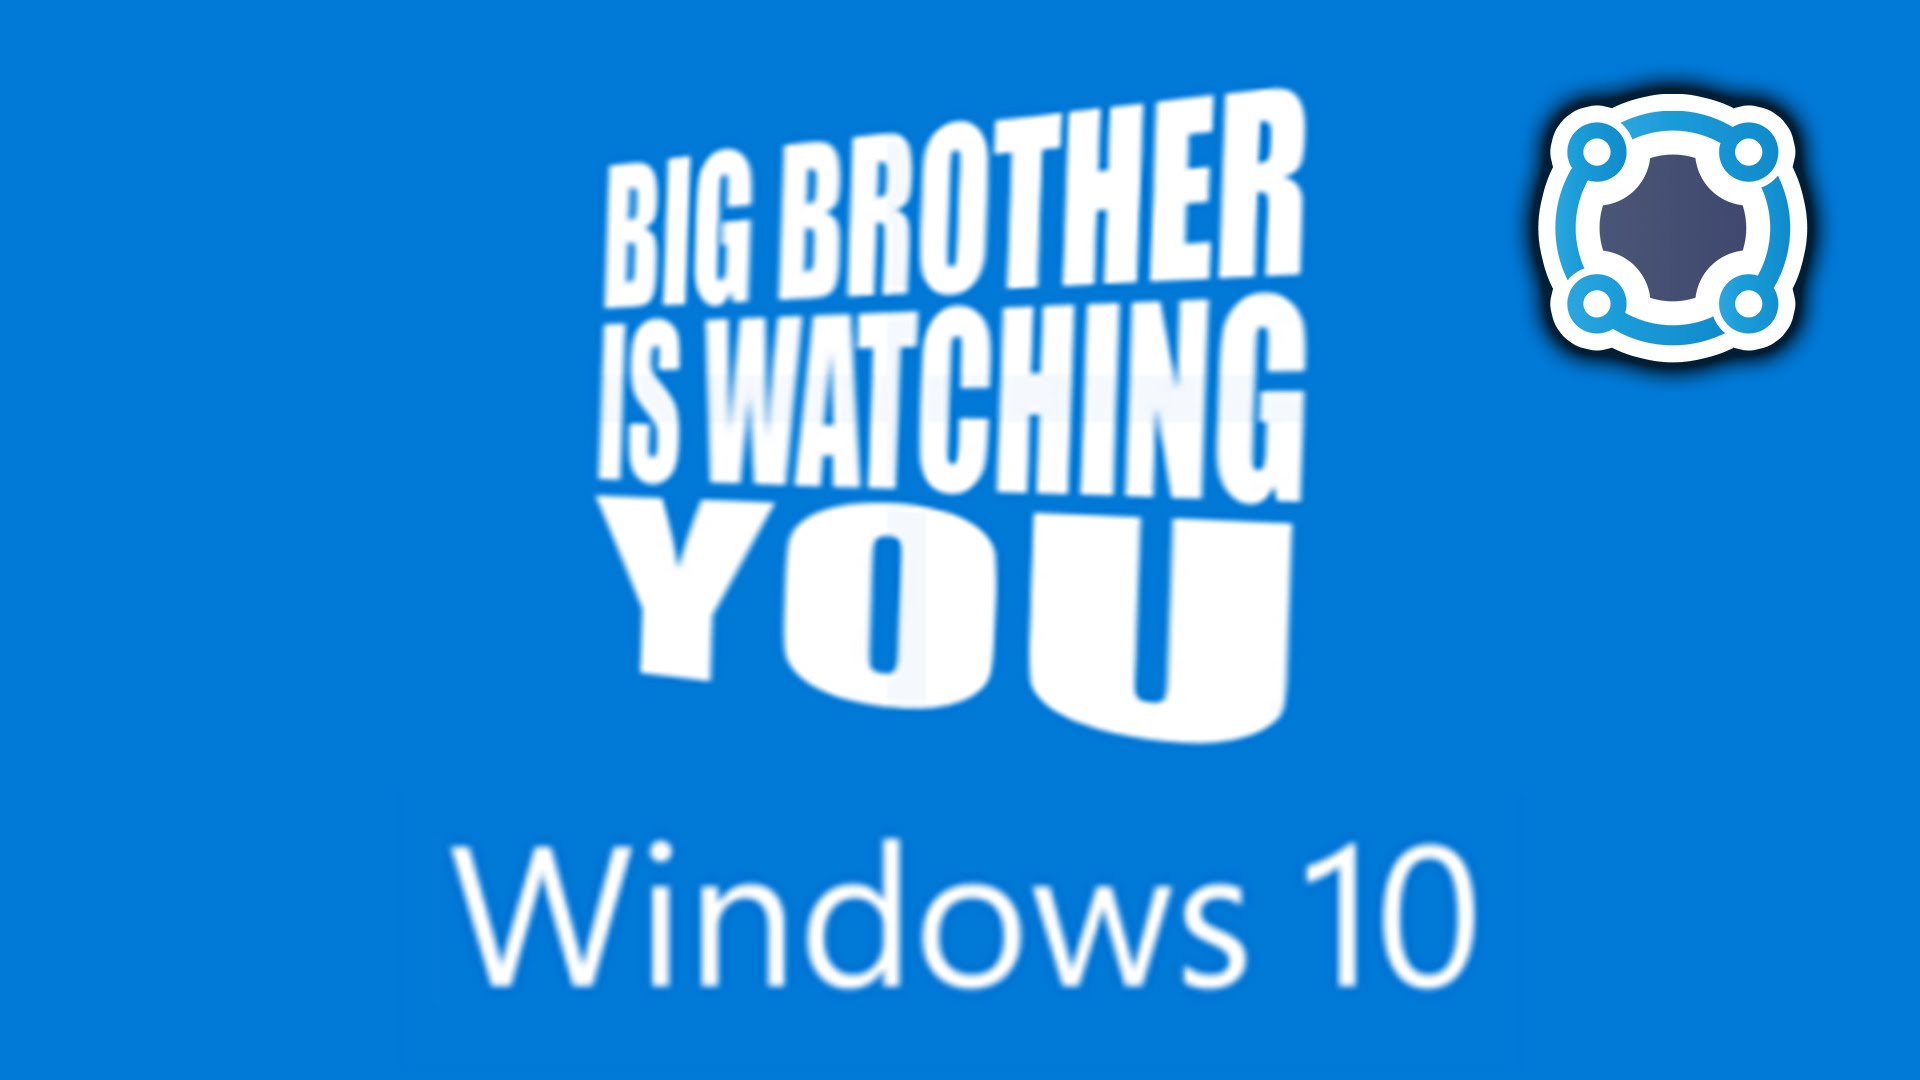 Pirate Sites Block Windows 10 Over Privacy Concerns